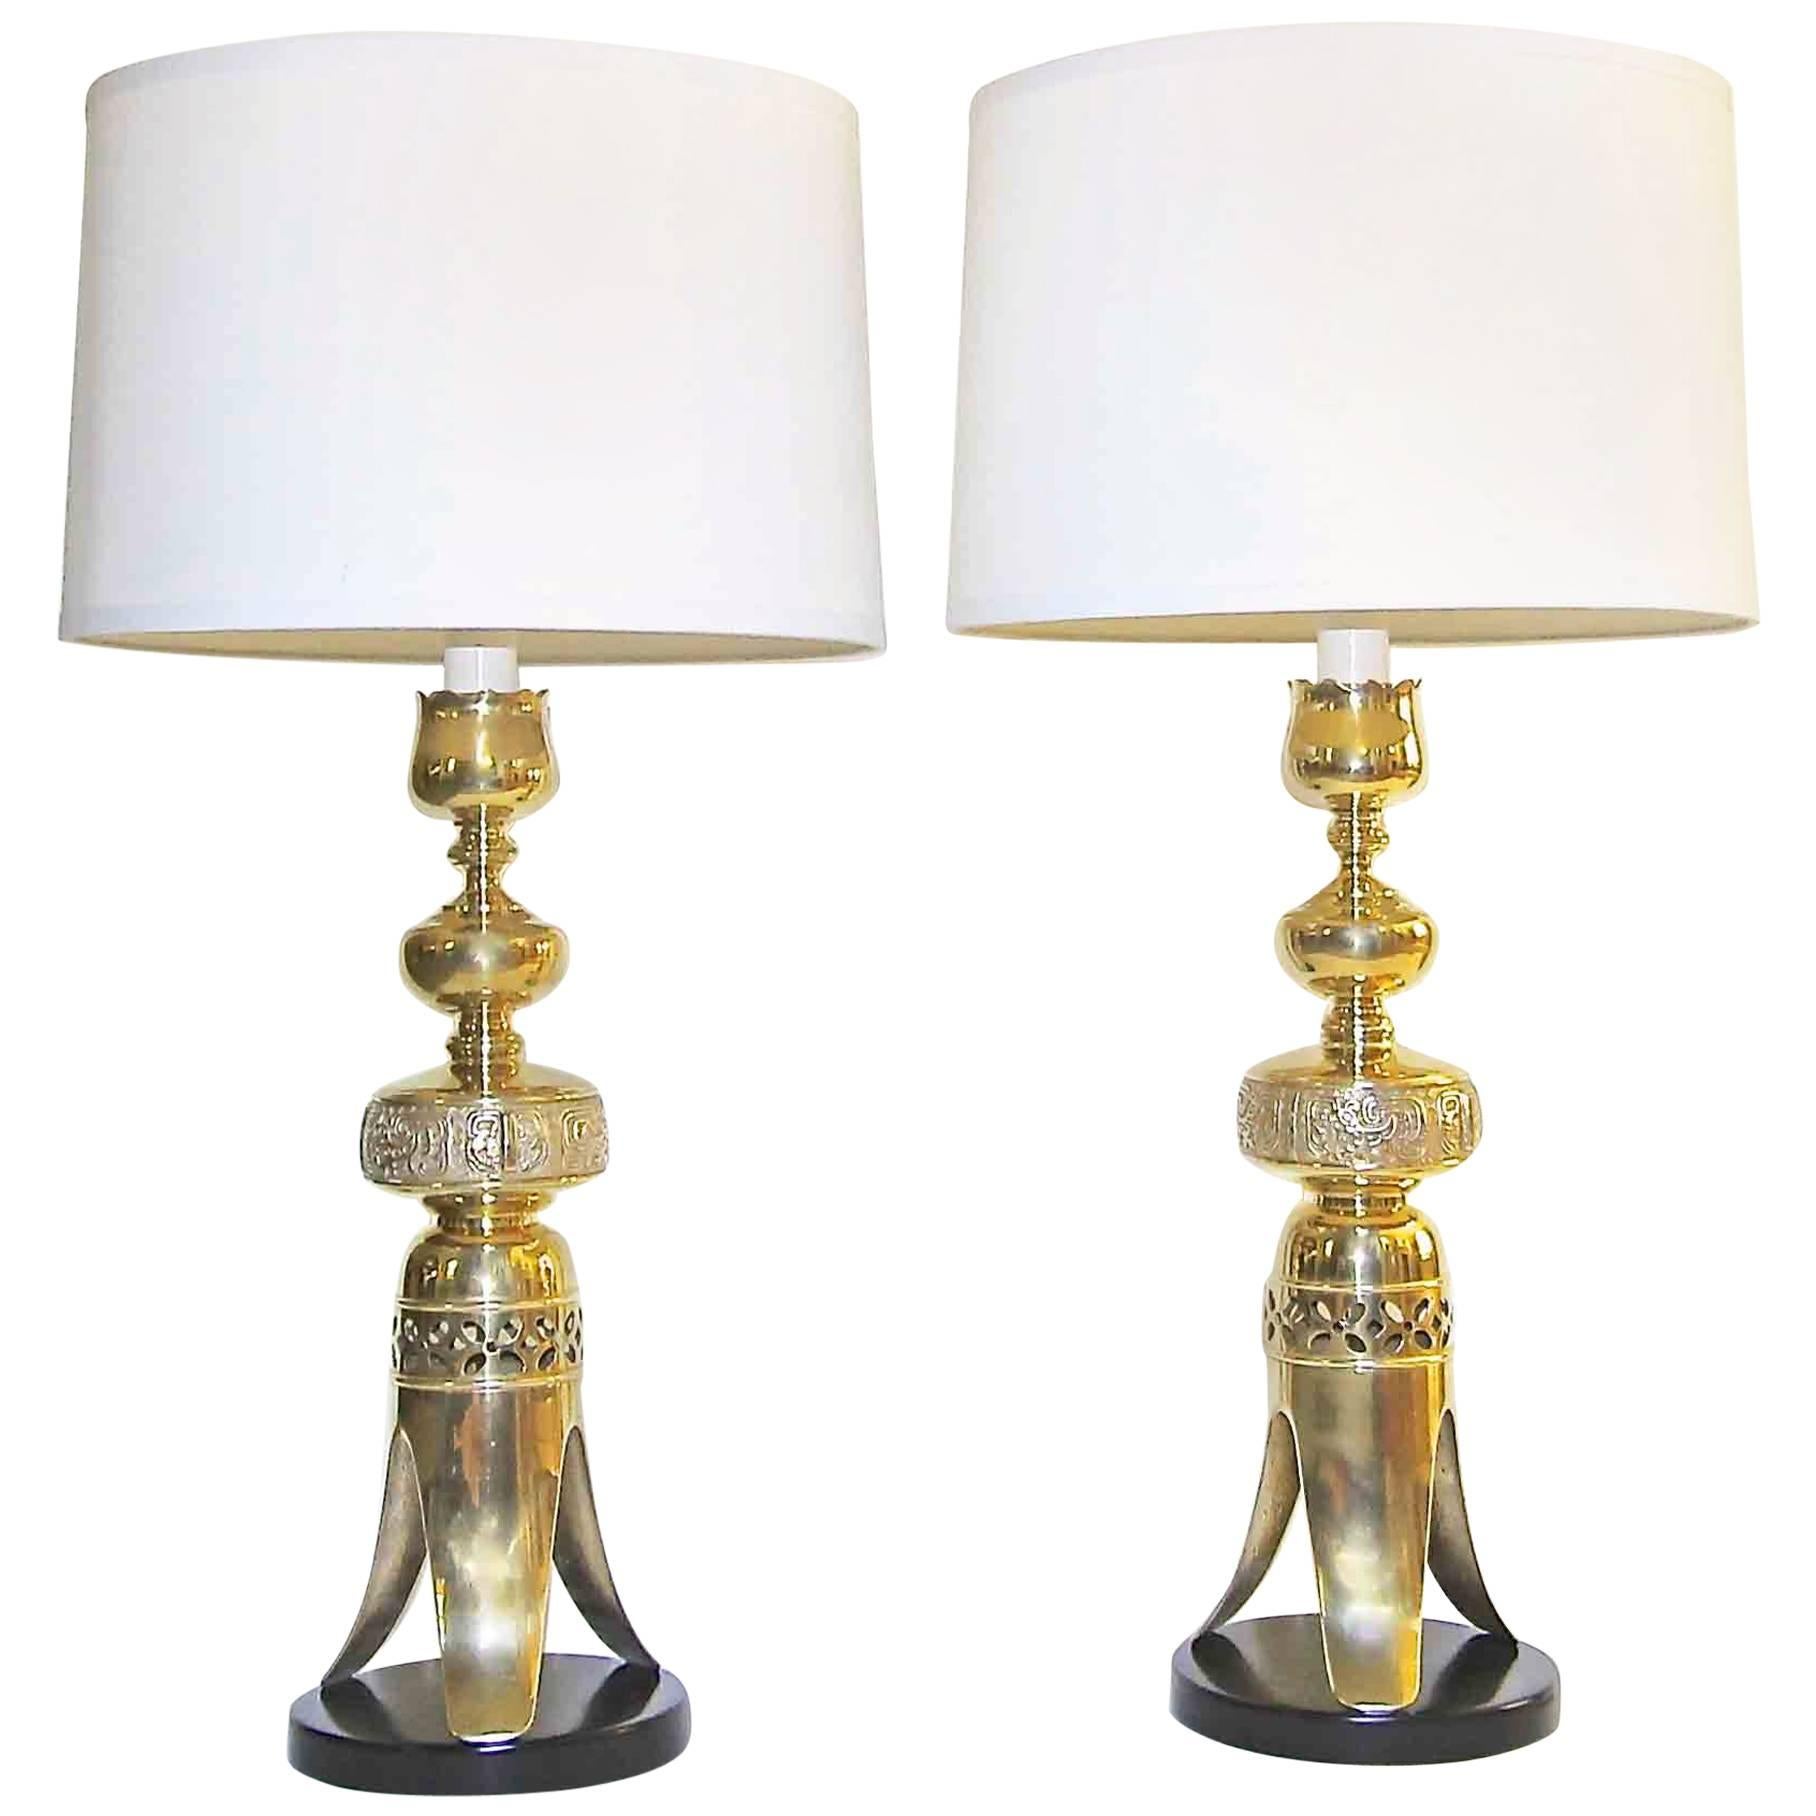 Pair of Tall Brass Asian Altar Candlestick Table Lamps